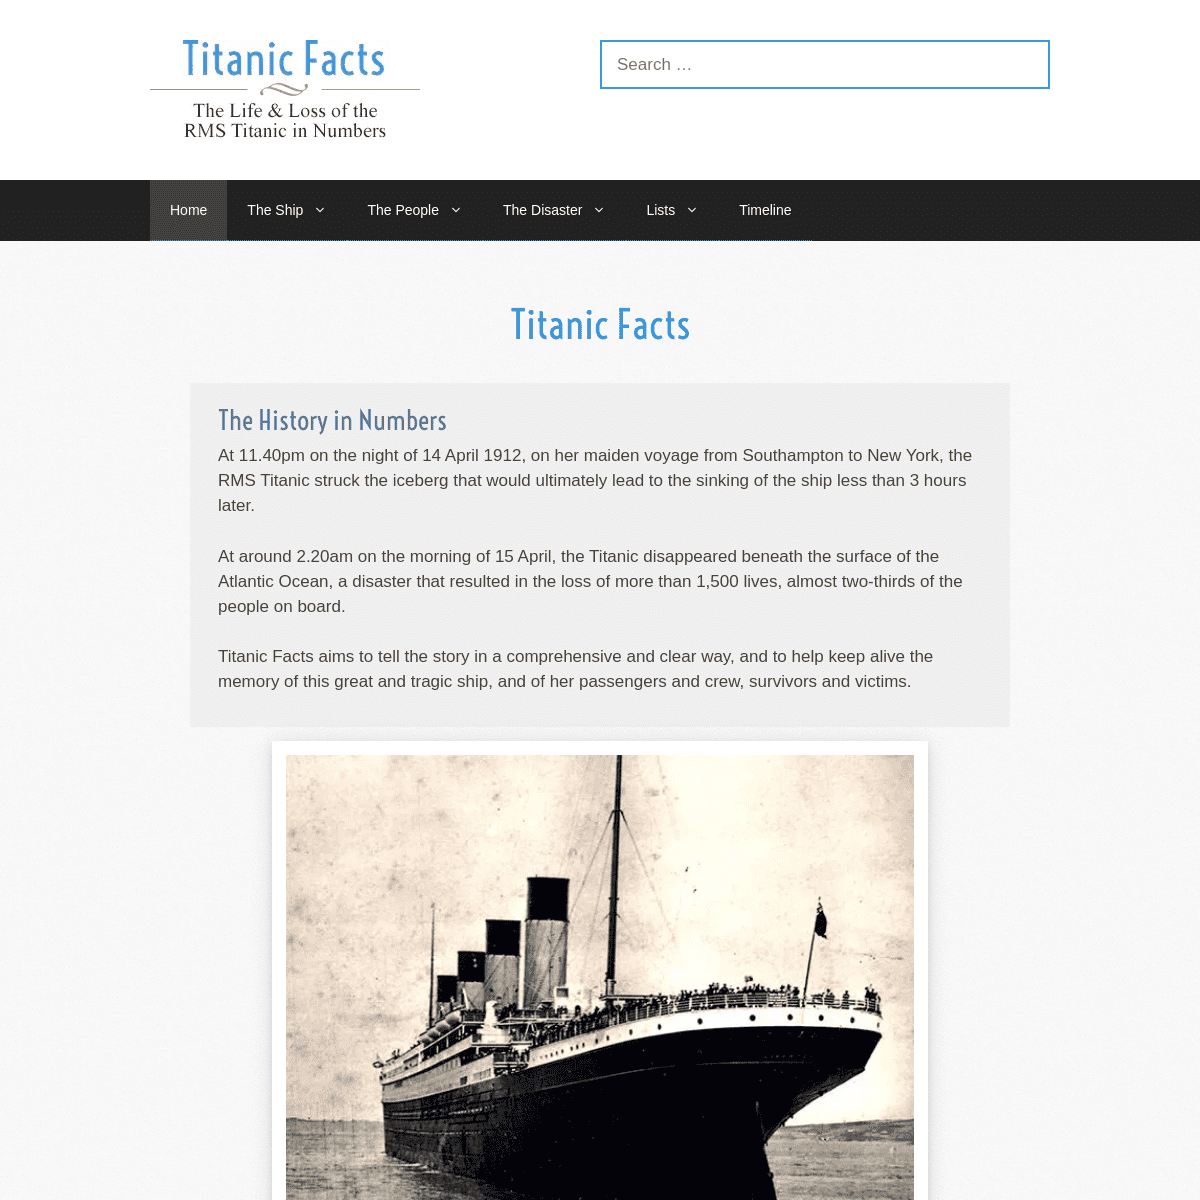 A complete backup of https://titanicfacts.net